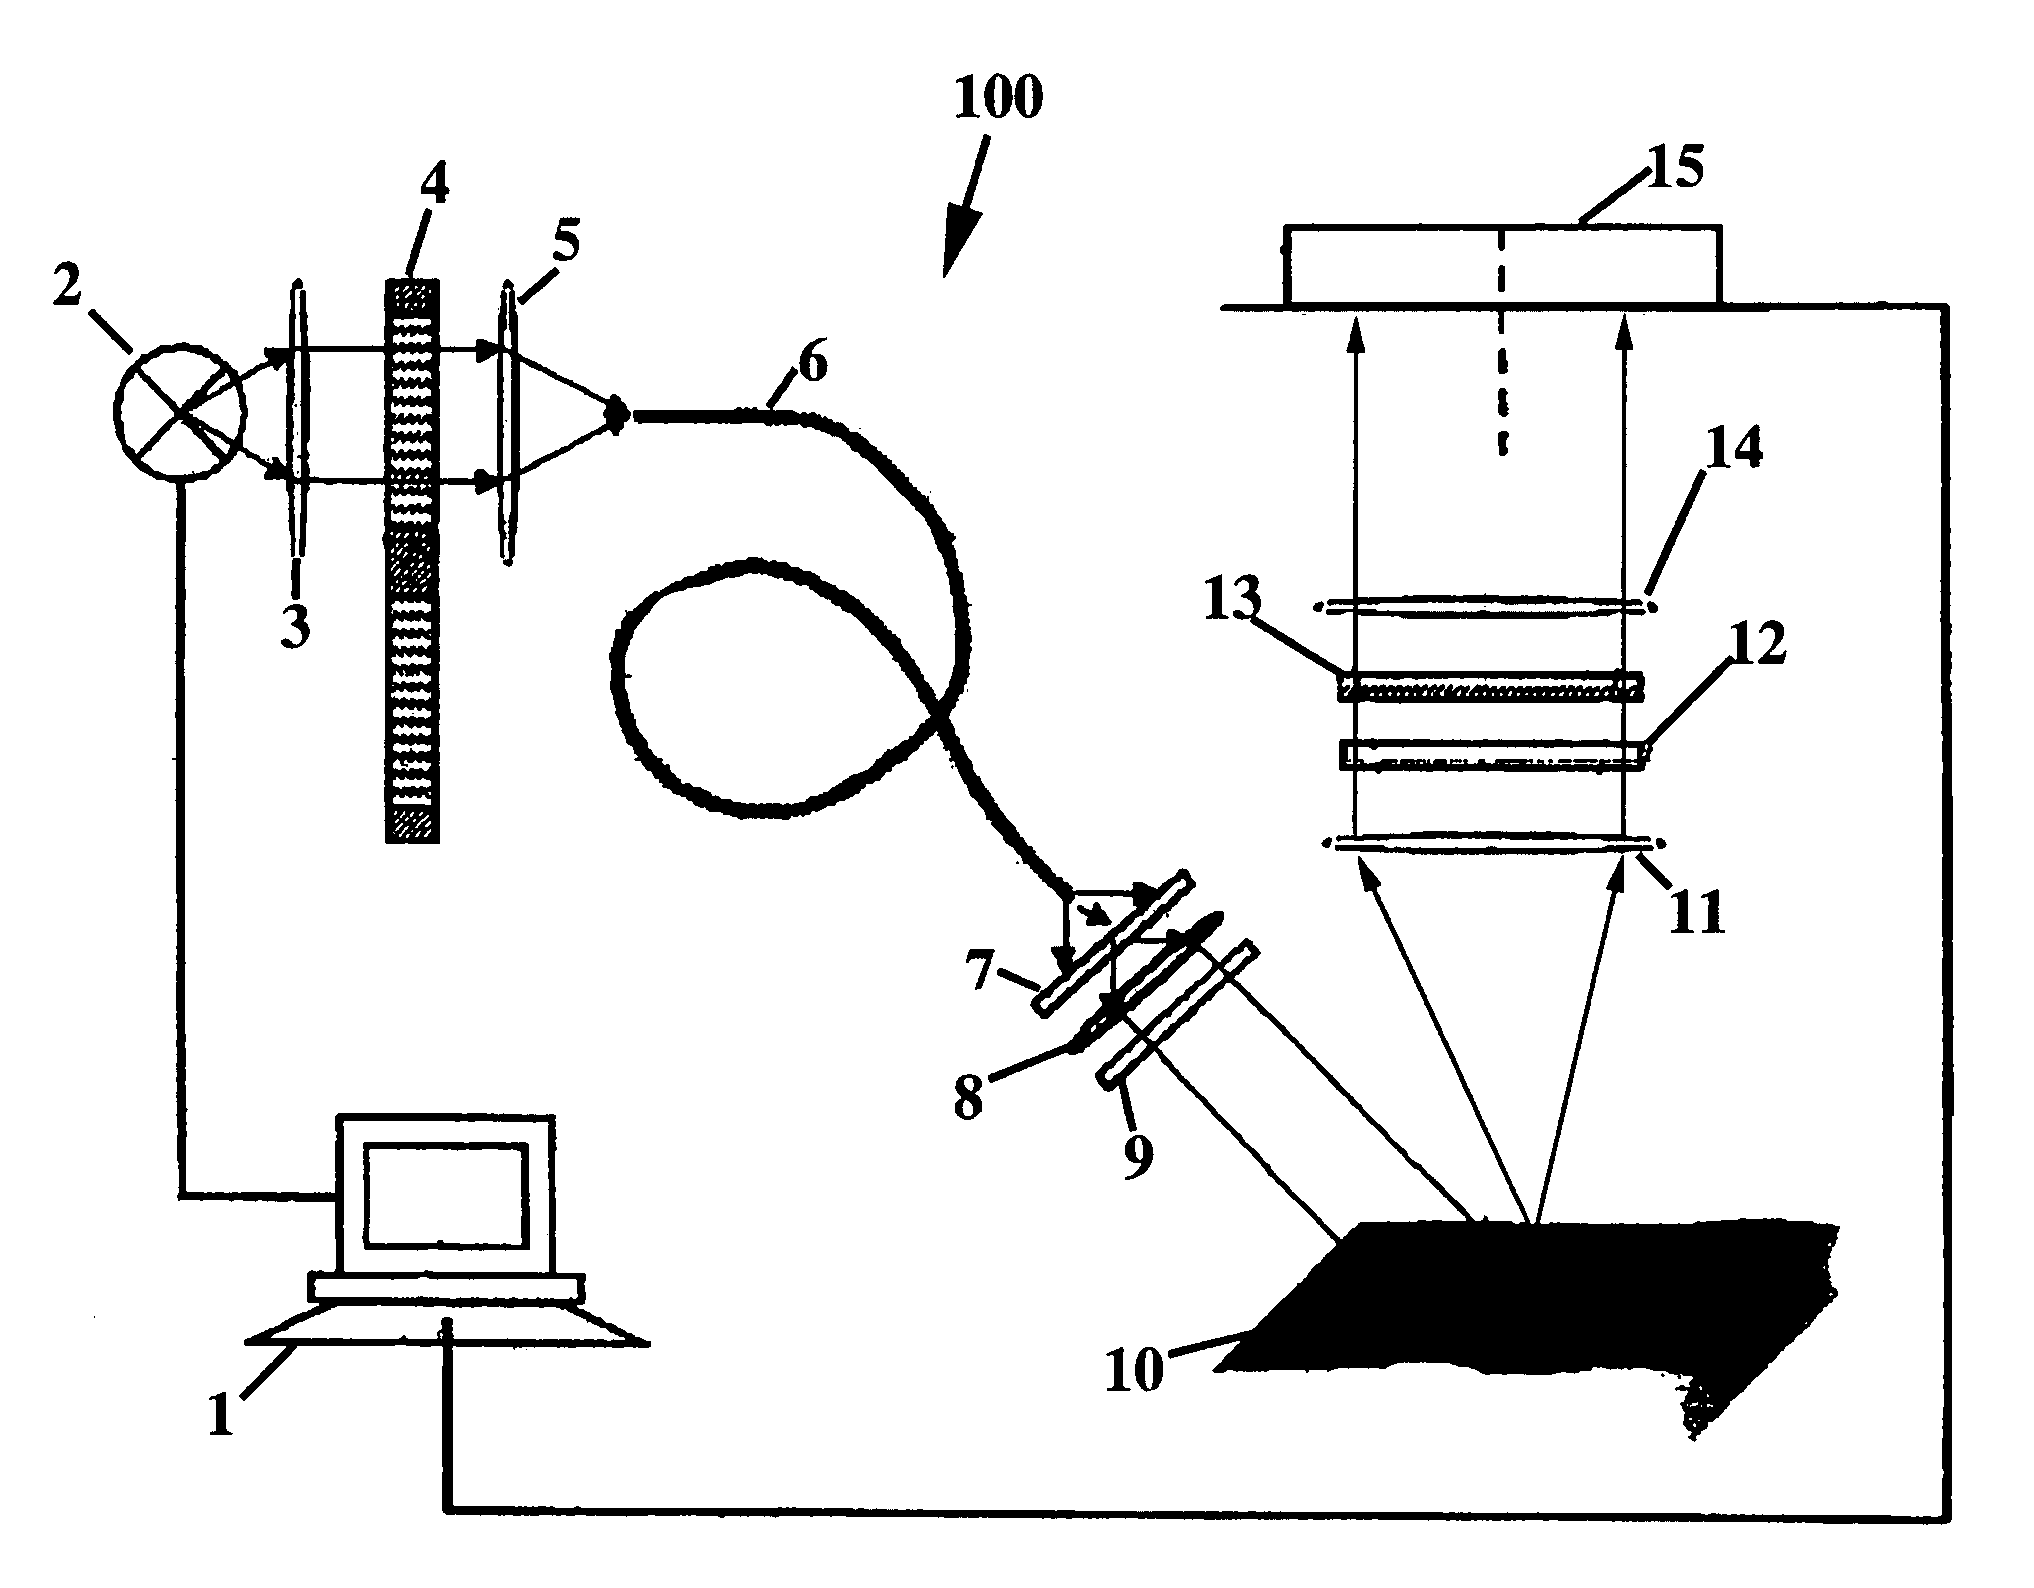 Polarized light imaging devices and methods